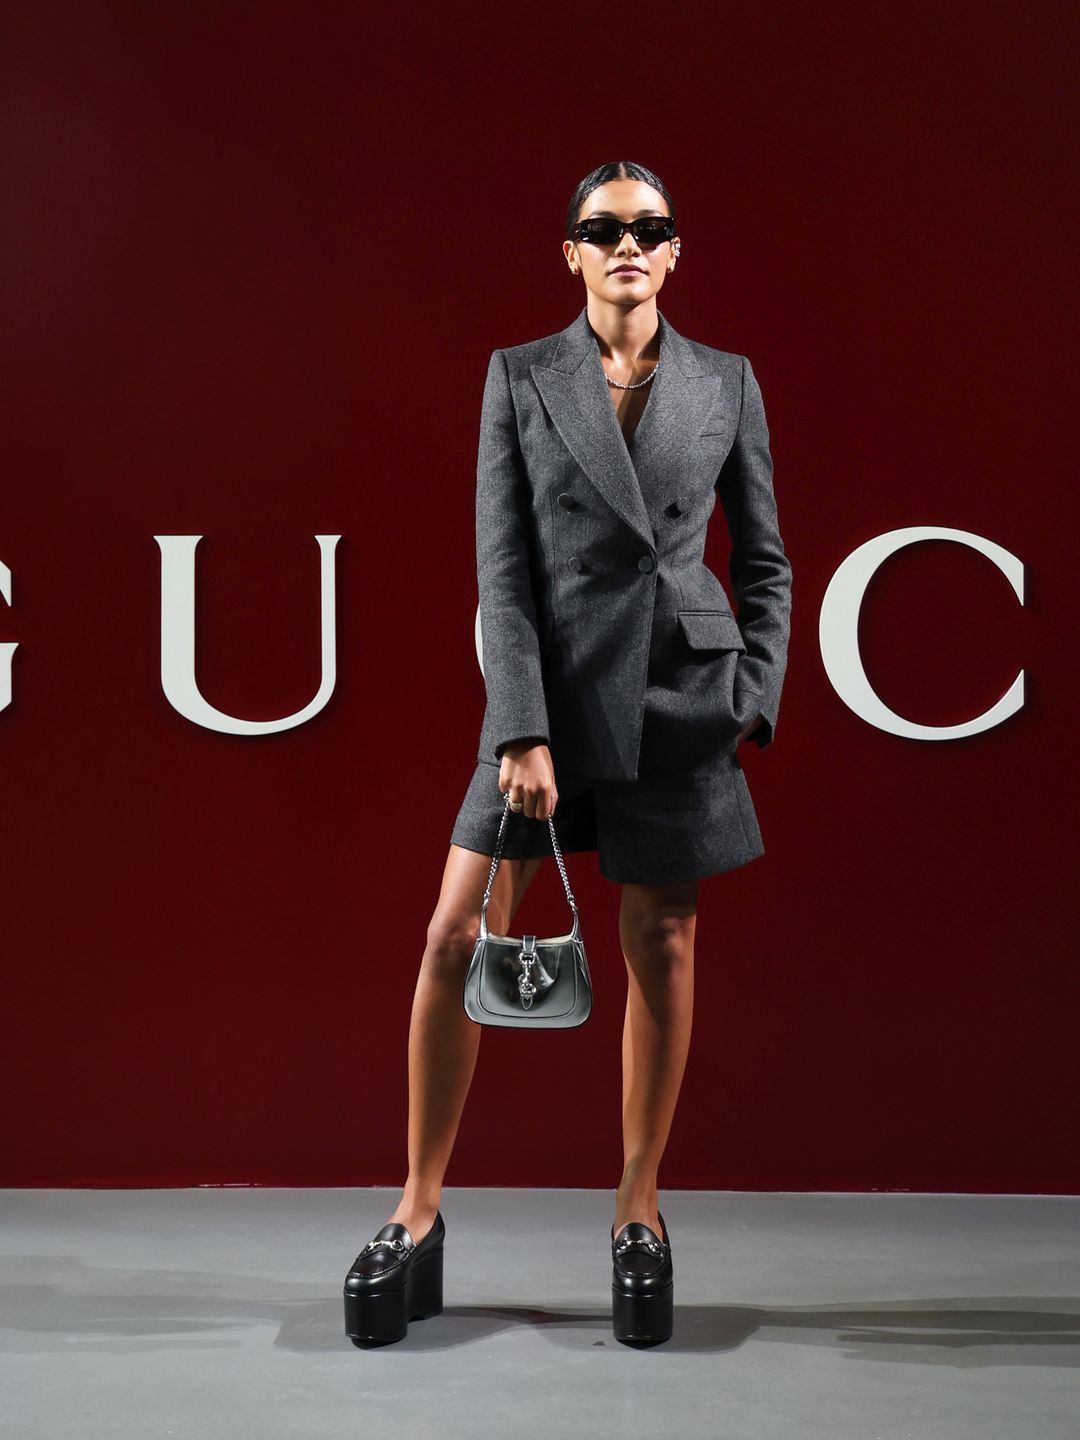 Olivia Dean attends the Gucci Women's Fall Winter 2024 Fashion Show in a grey blazer and shorts combo, topping off the look with a pair of platform loafers.